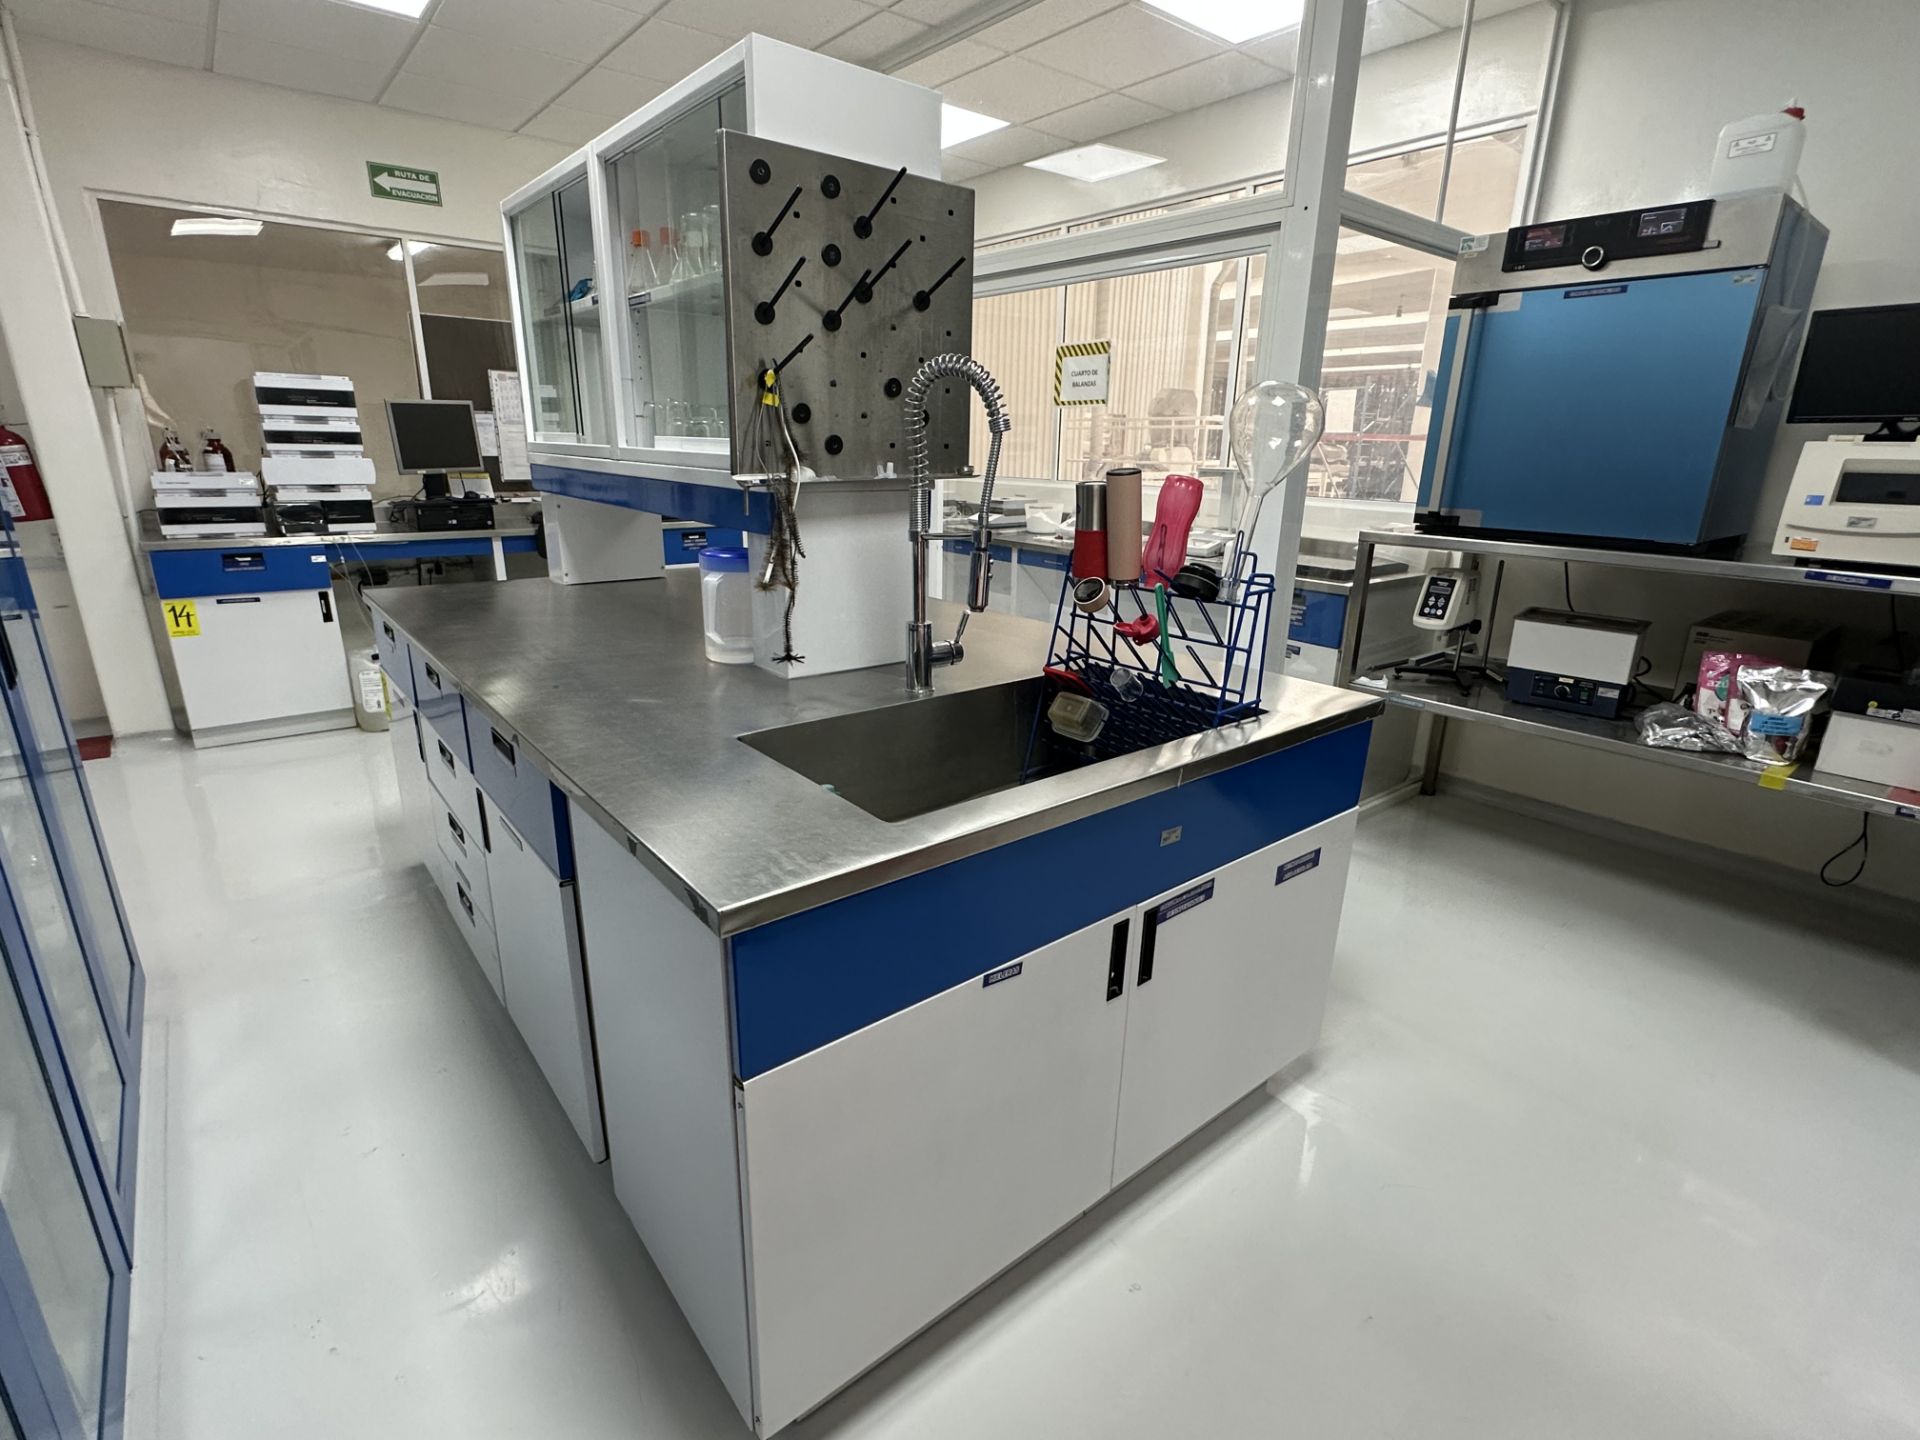 1 Central laboratory cabinet with stainless steel cover and sink, measures approximately 2.45 x 1.4 - Image 4 of 11